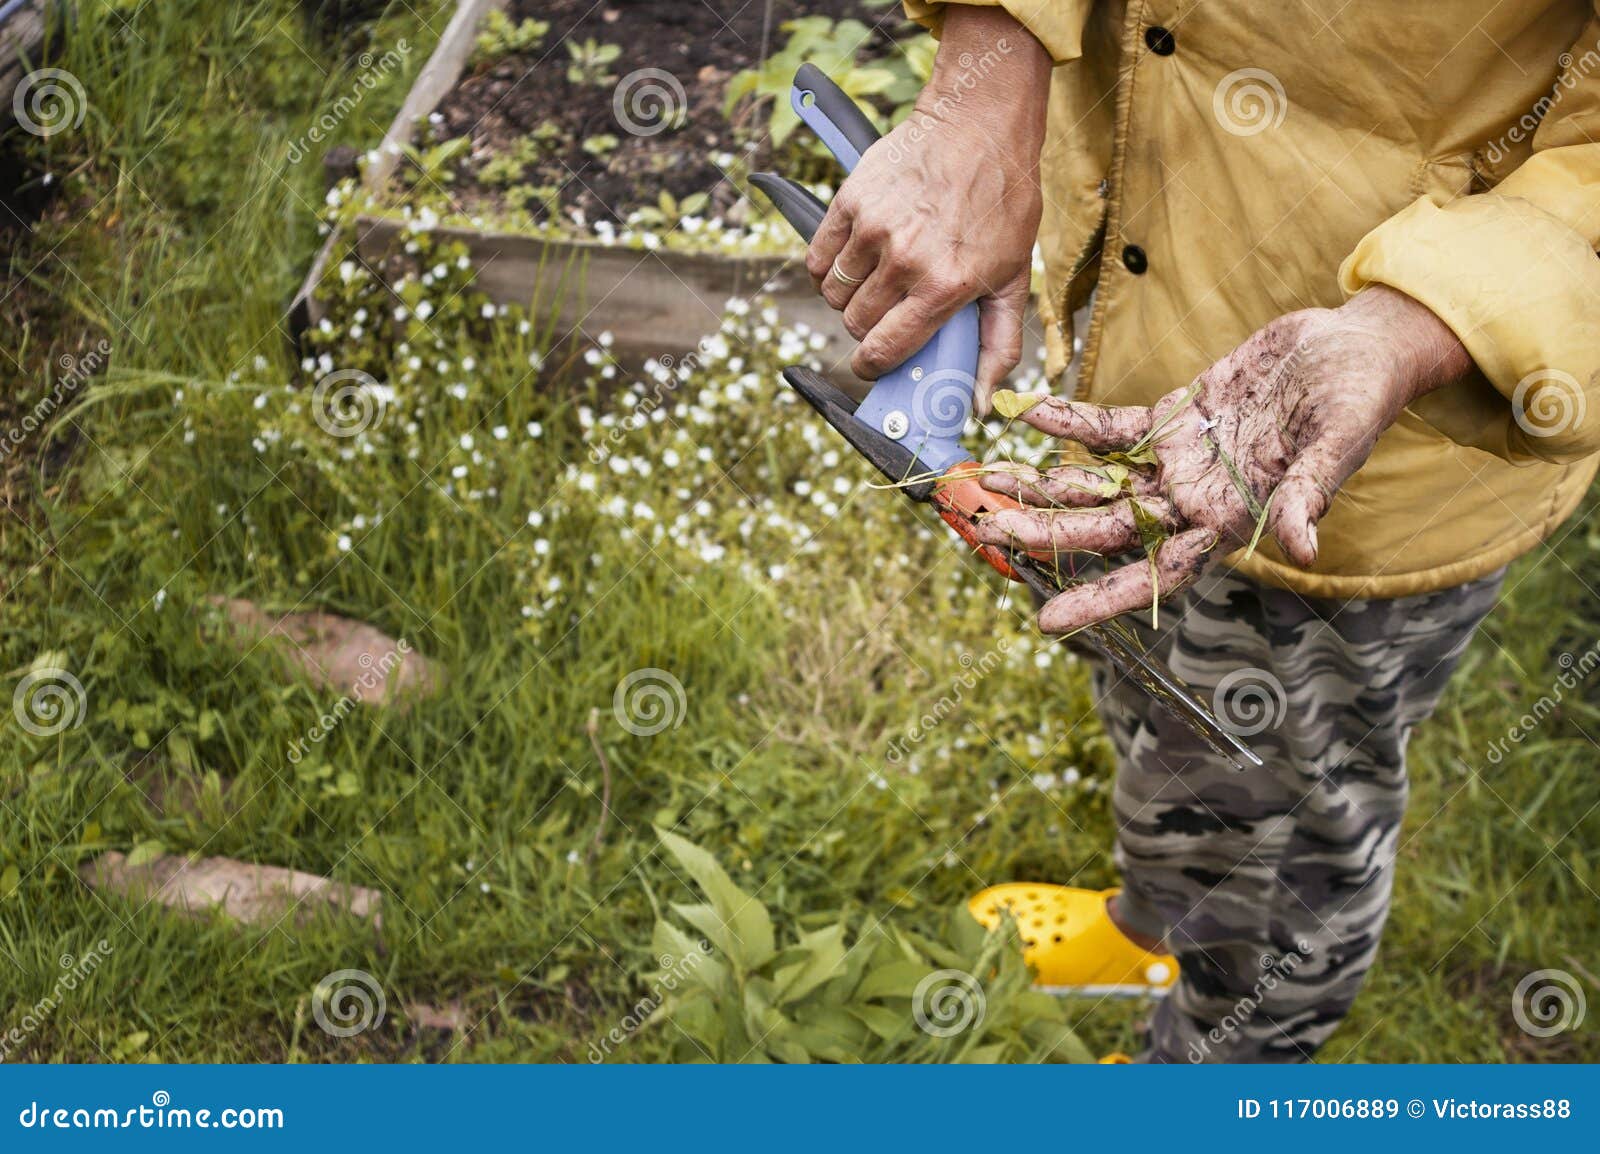 Gardening with Dirty Hands stock image. Image of tools - 117006889